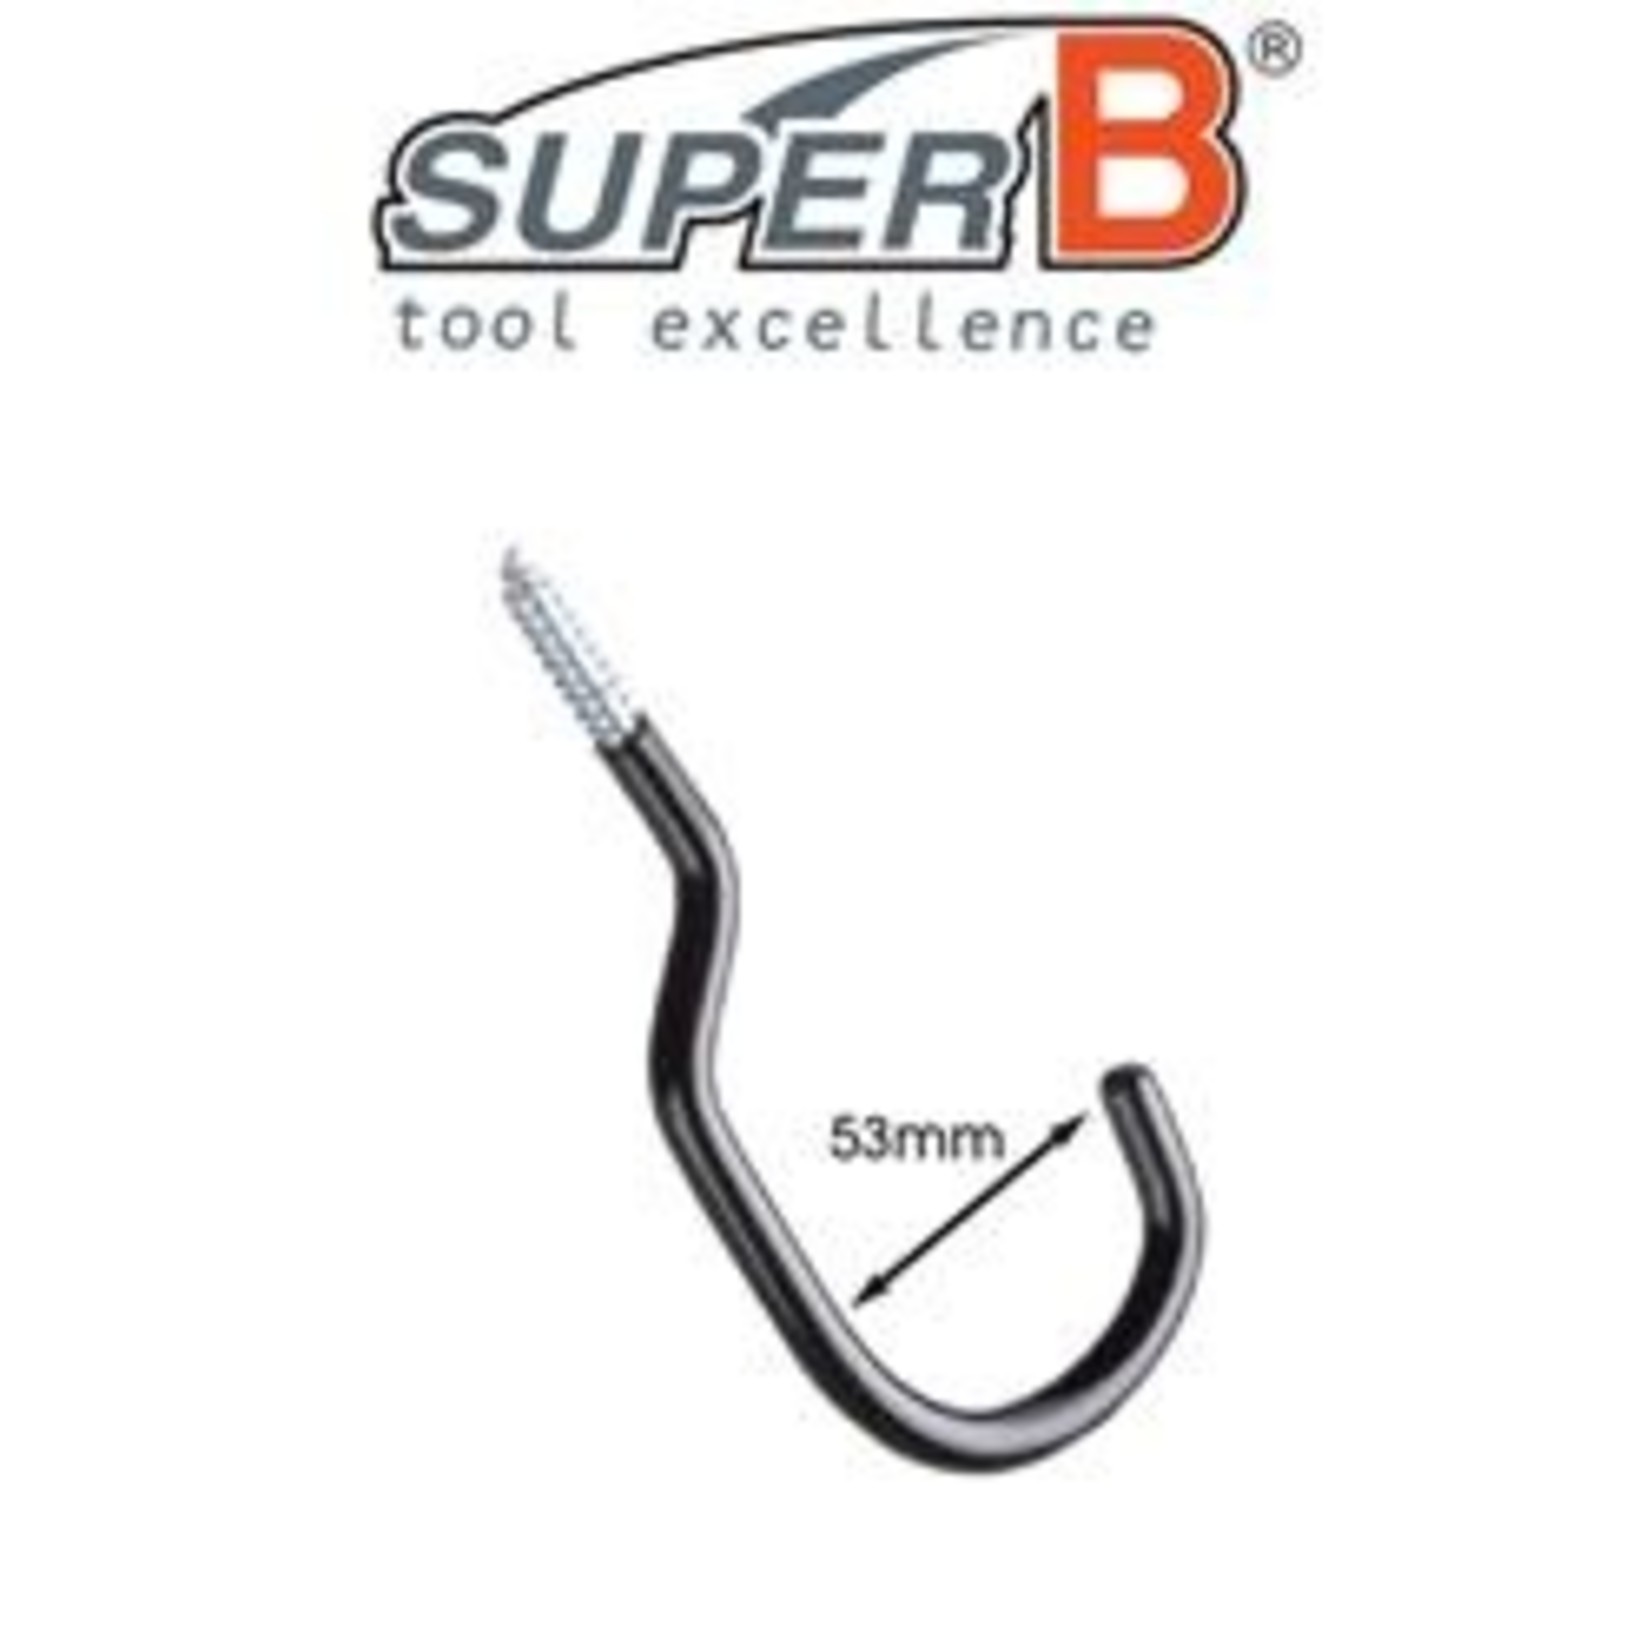 Super B SuperB Storage Mounted Hook - 53mm With A Nylon Nail Anchor - Bike Tool